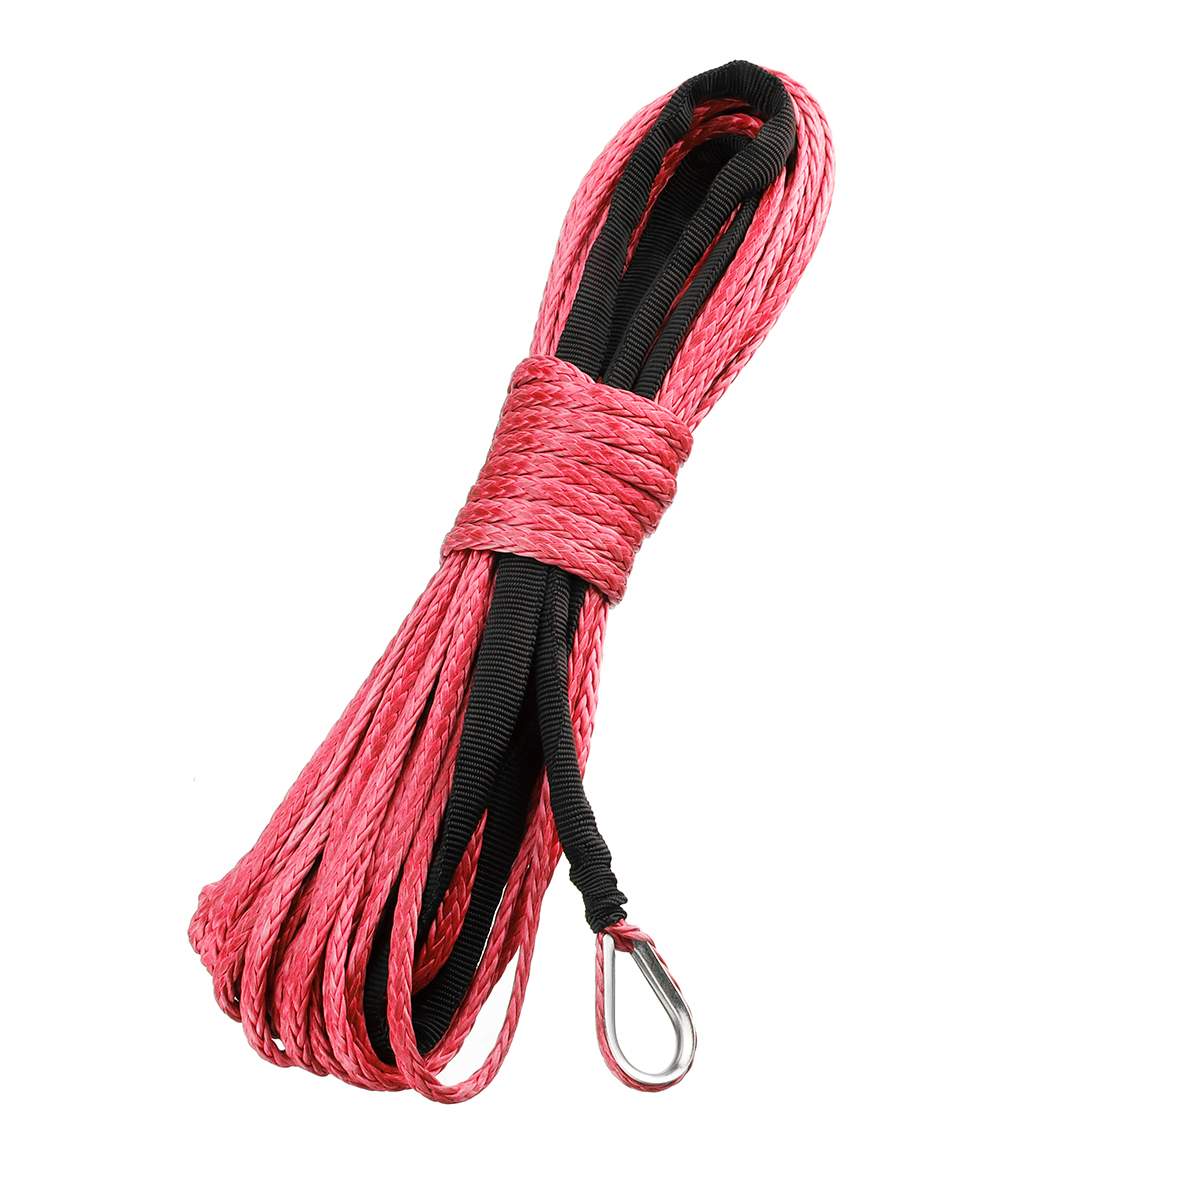 Autoleader 3/16'' x 50' Synthetic Fiber Winch Line Cable Rope 7700+ LBs + Sheath For ATV UTV 5.5mm*15m Synthetic